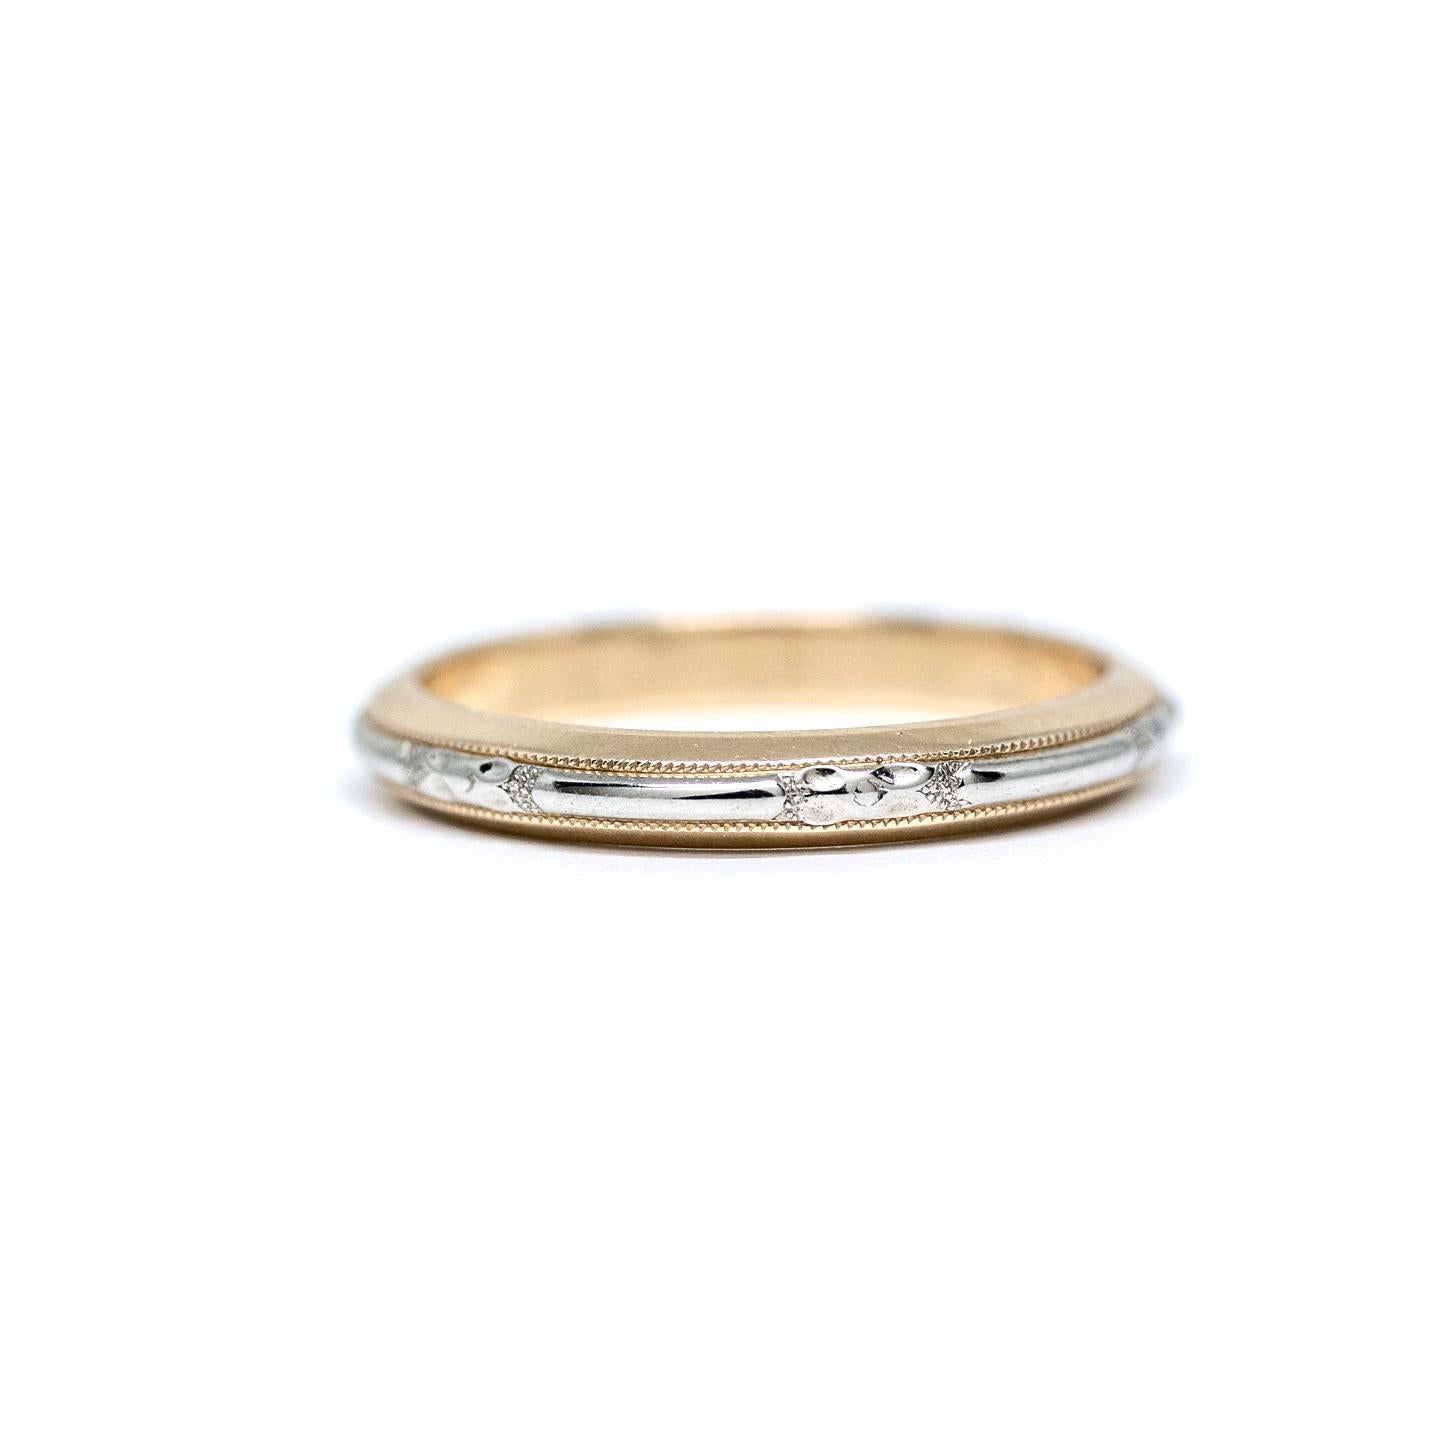 Here we have a genuine Art Deco wedding band crafted in 14 karat 